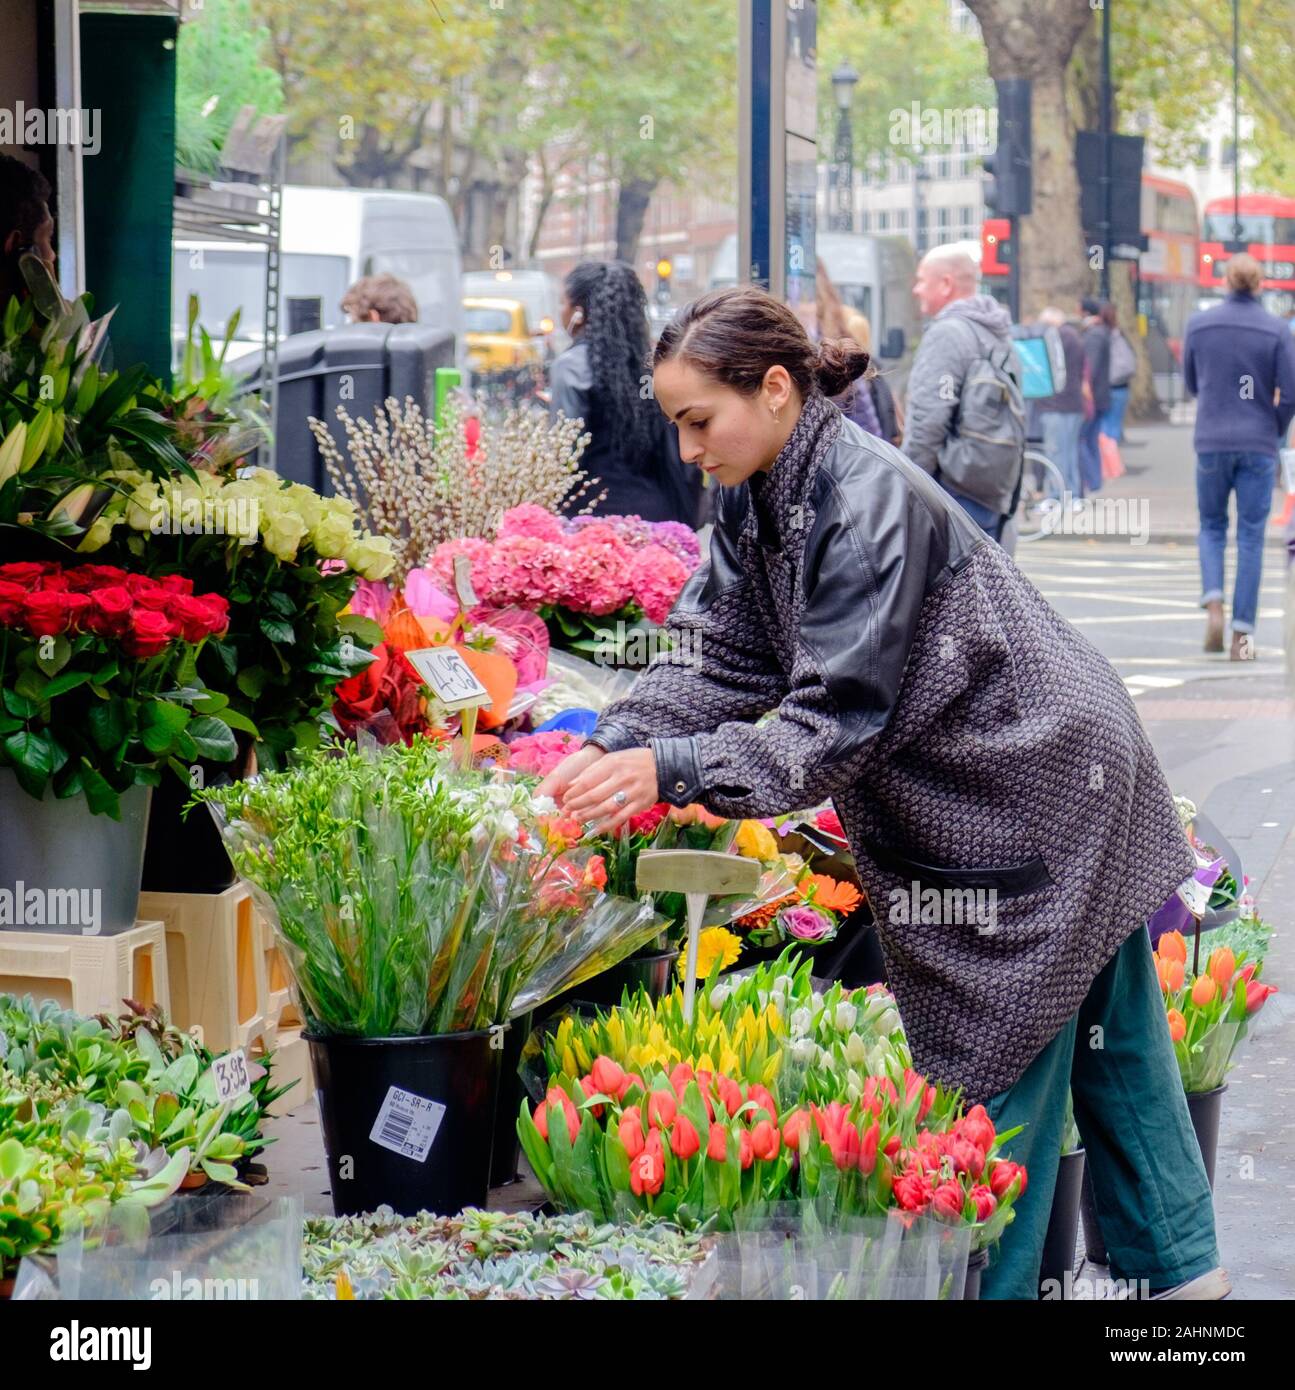 Lady chooses flowers at a colourful corner street stall while people are walking past. Holborn, Central London, UK. Stock Photo